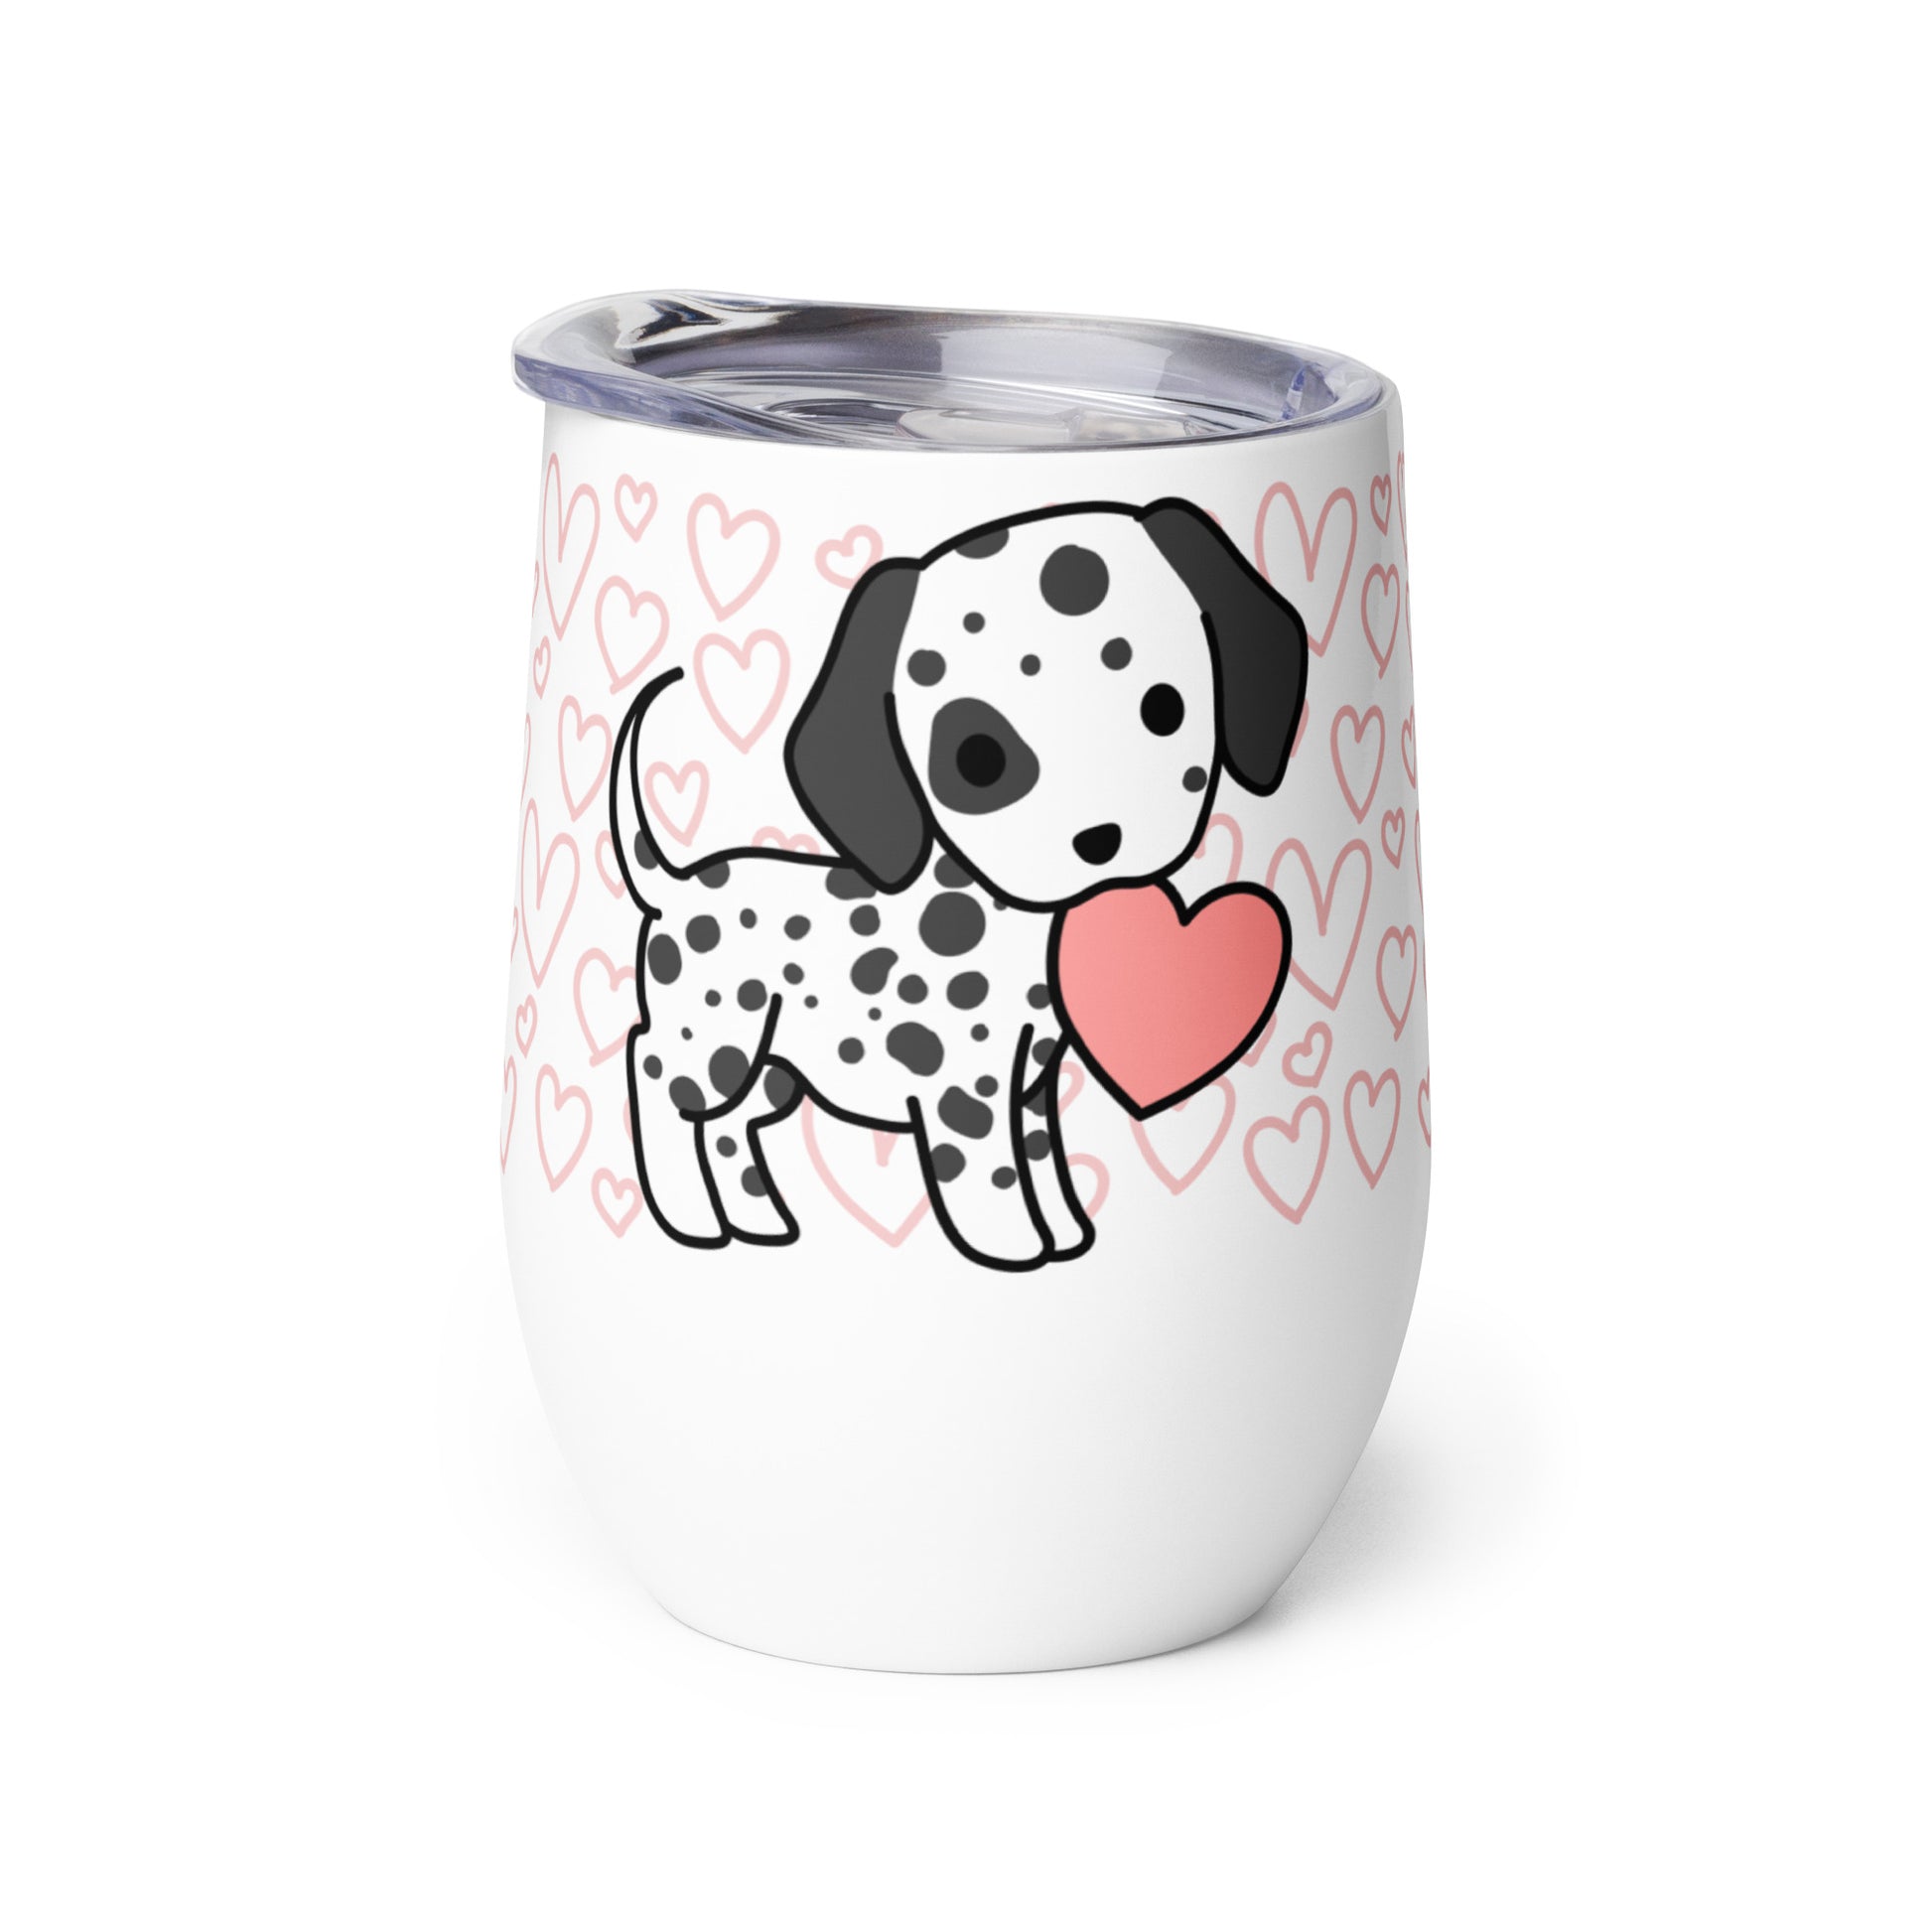 A white metal wine tumbler with a plastic lid. A pattern of hearts wraps around the top half of the tumbler. Centered on the tumbler is a cute, stylized illustration of a Dalmatian